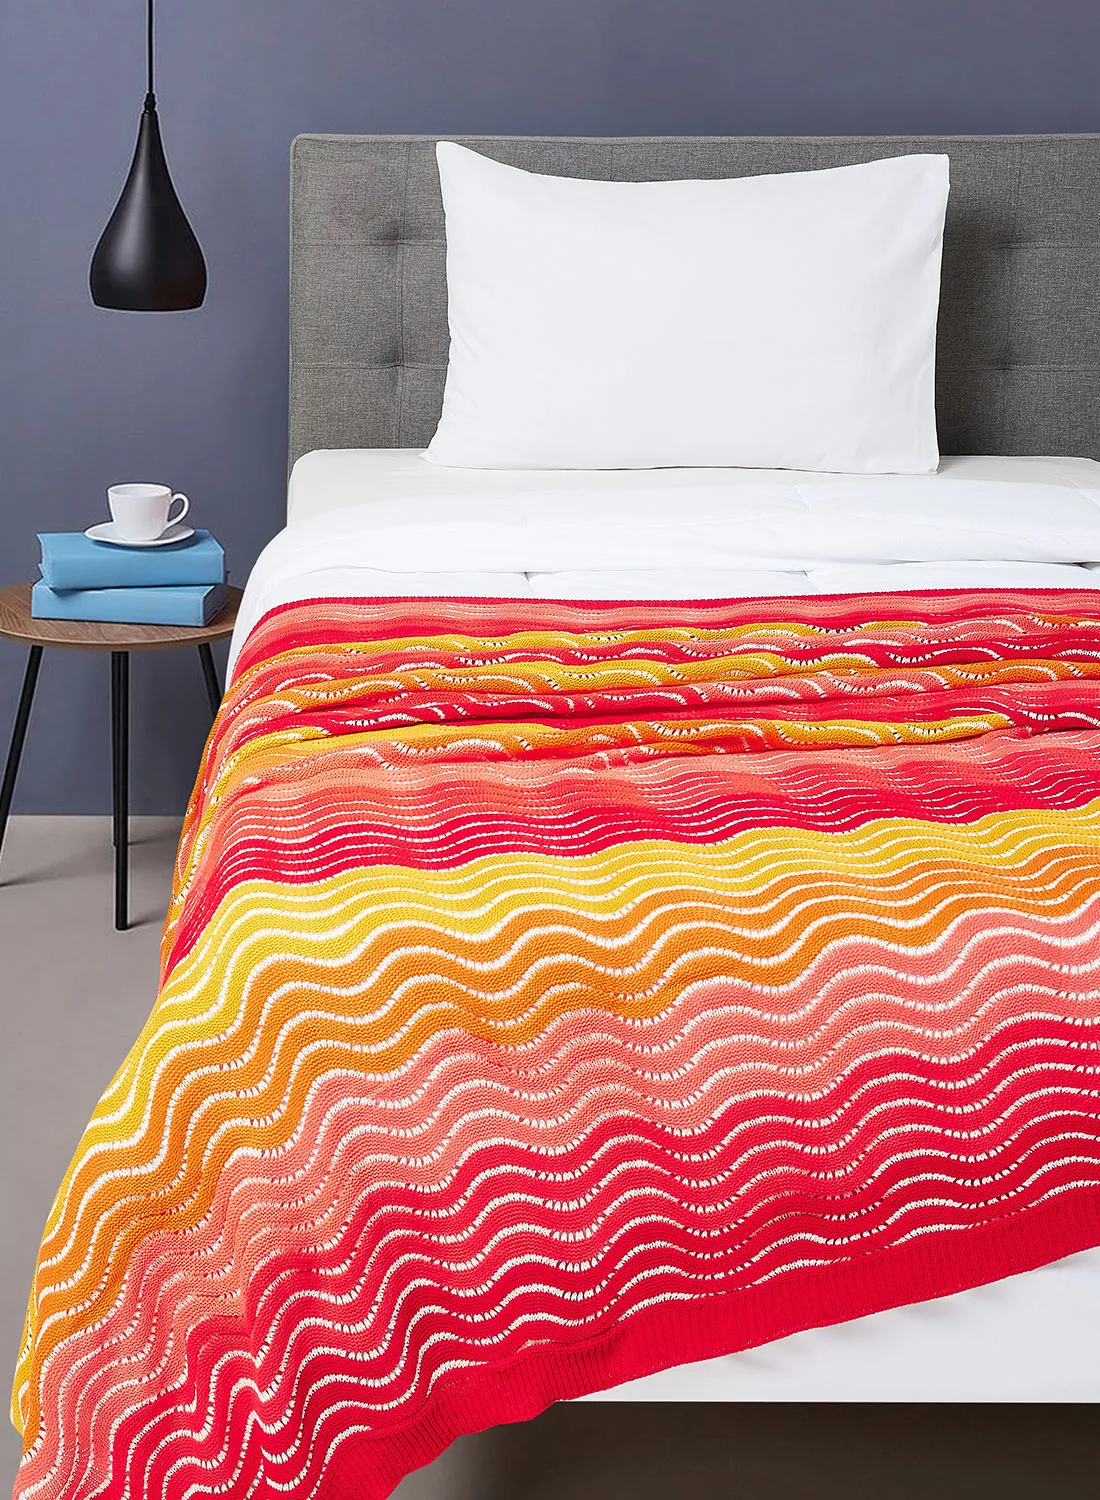 noon east Lightweight Summer Blanket Queen Size 350 GSM Soft Knitted All Season Blanket Bed And Sofa Throw  160 X 220 Cms Red/Yellow